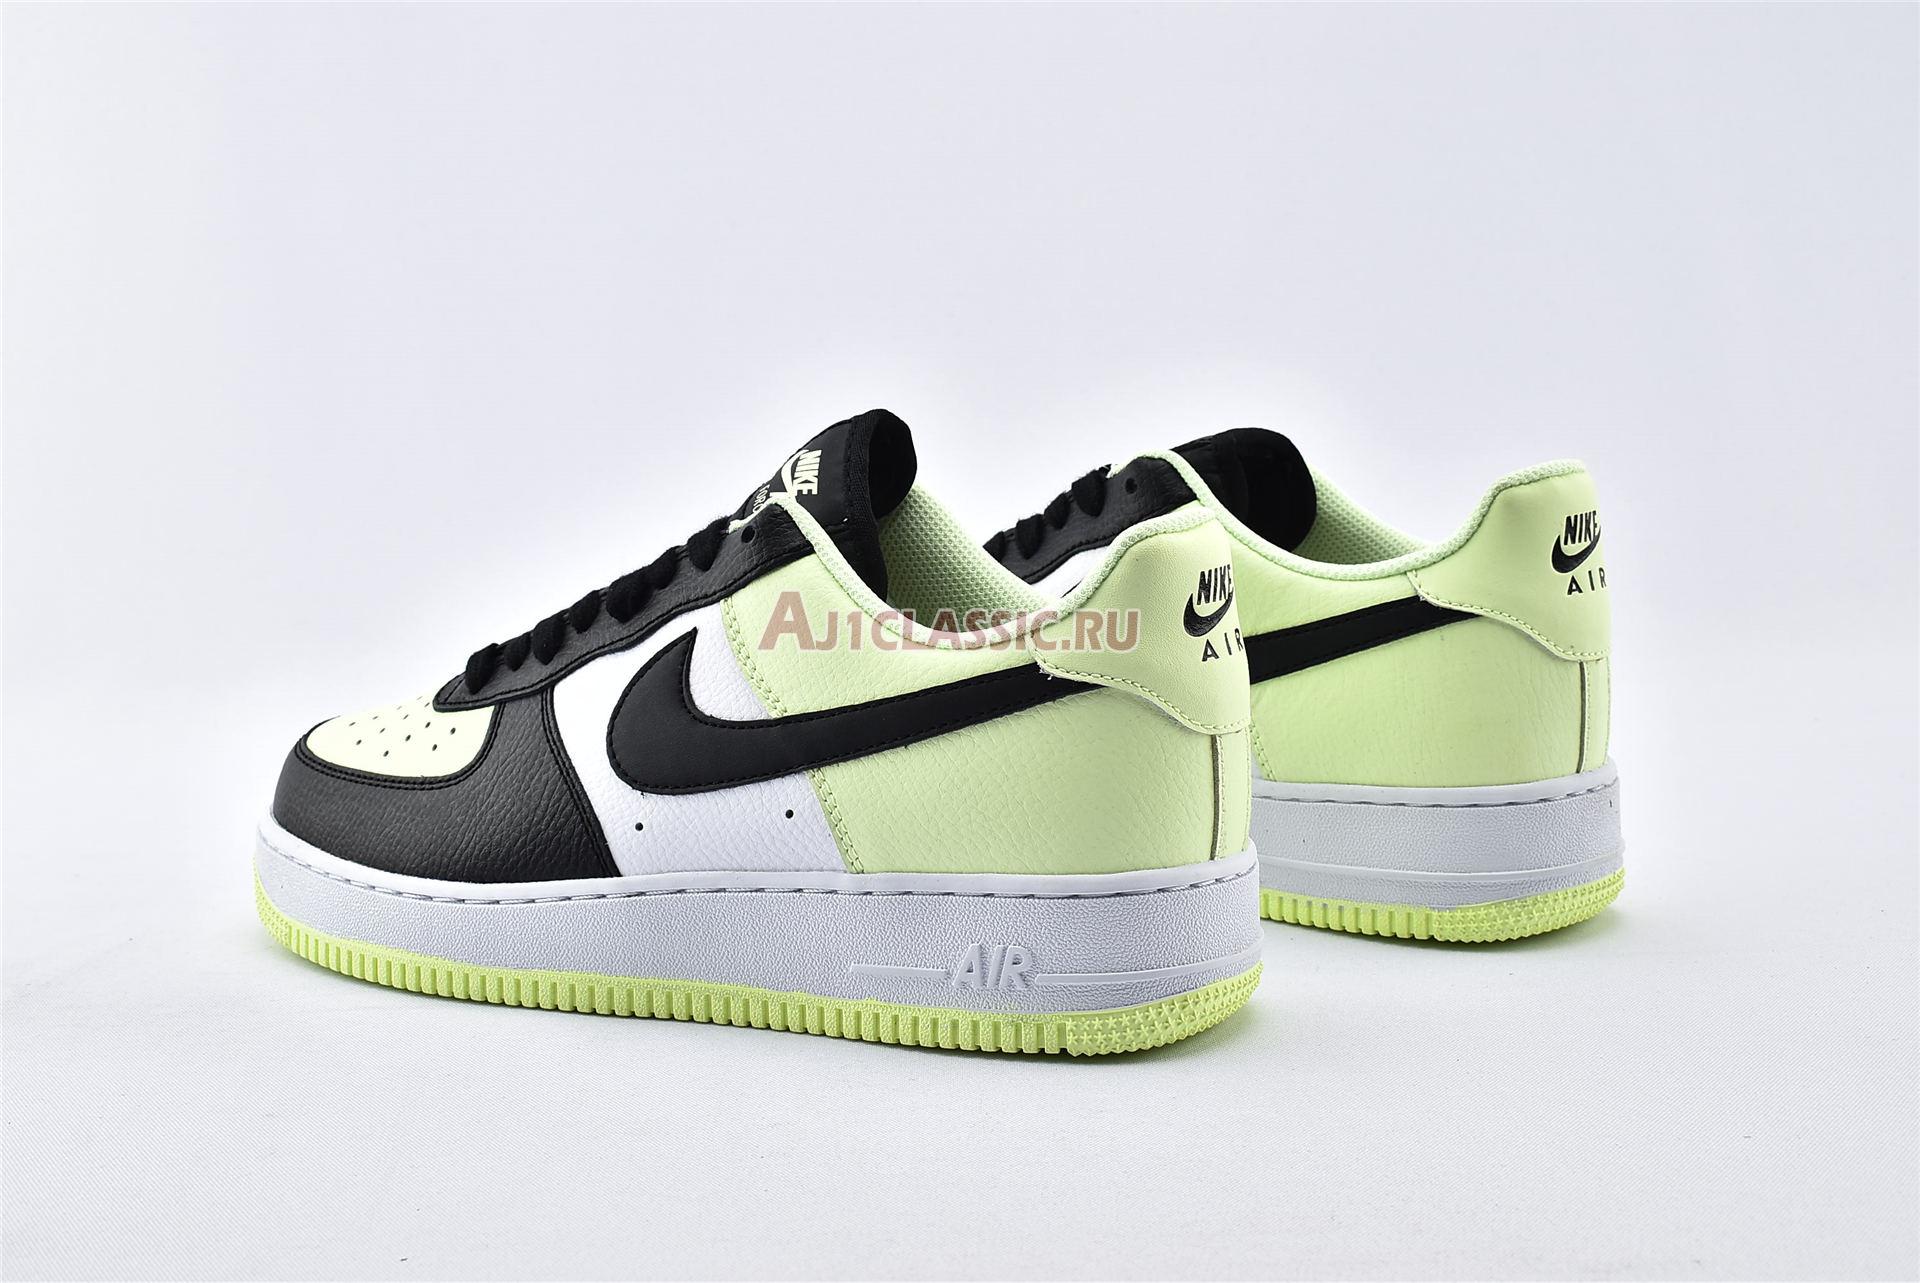 Nike Air Force 1 Low "Barely Volt" CW2361-700